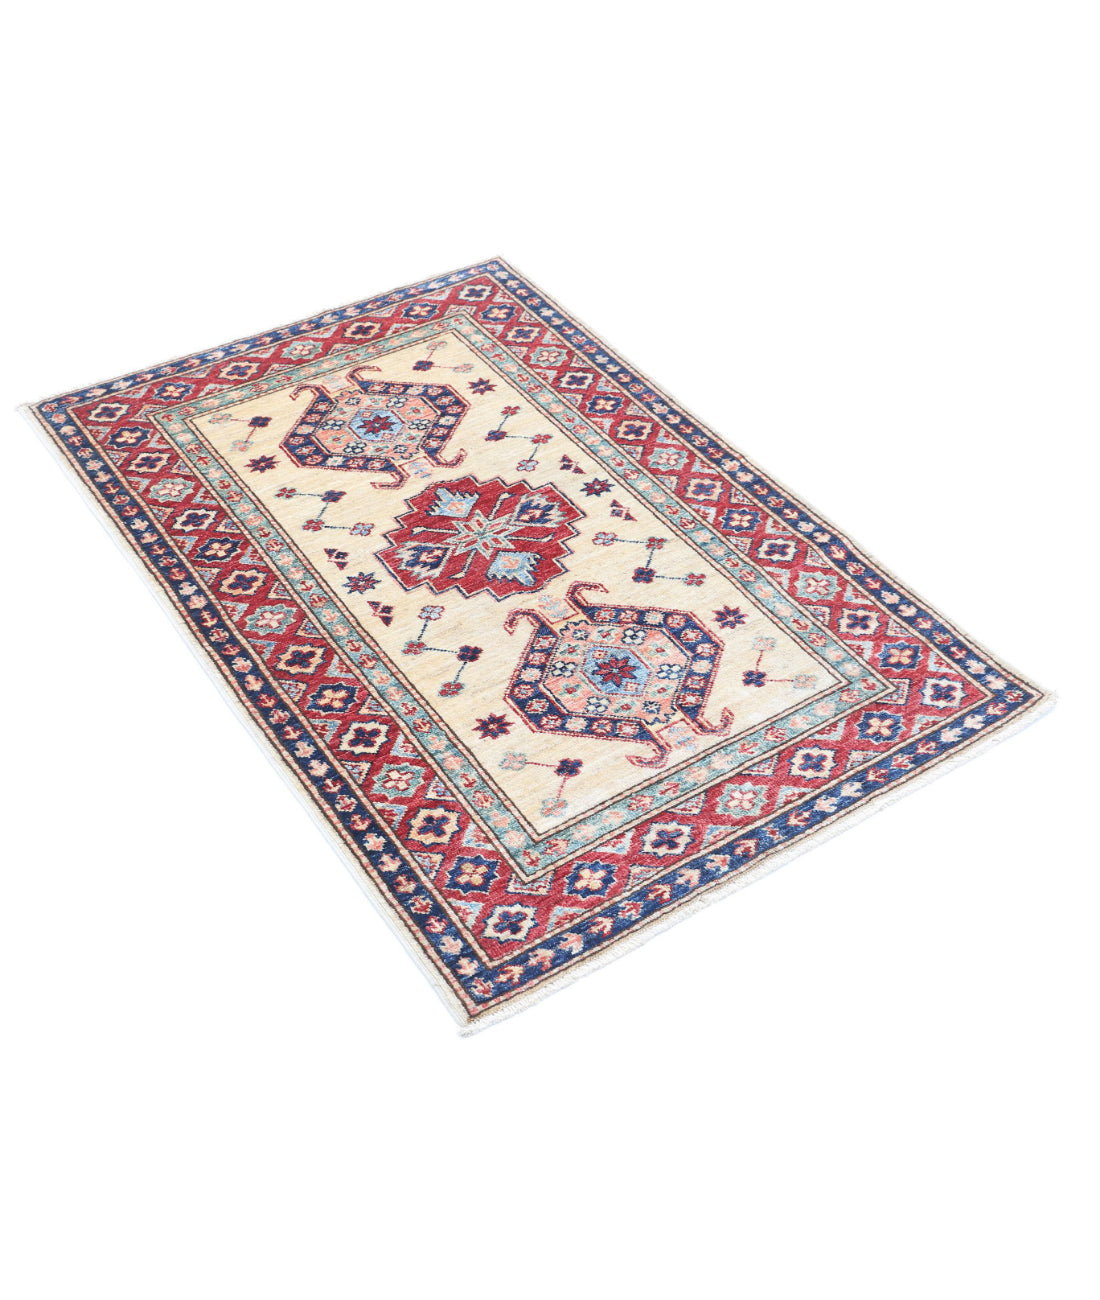 Hand Knotted Royal Kazak Wool Rug - 2'10'' x 4'0'' 2'10'' x 4'0'' (85 X 120) / Ivory / Red